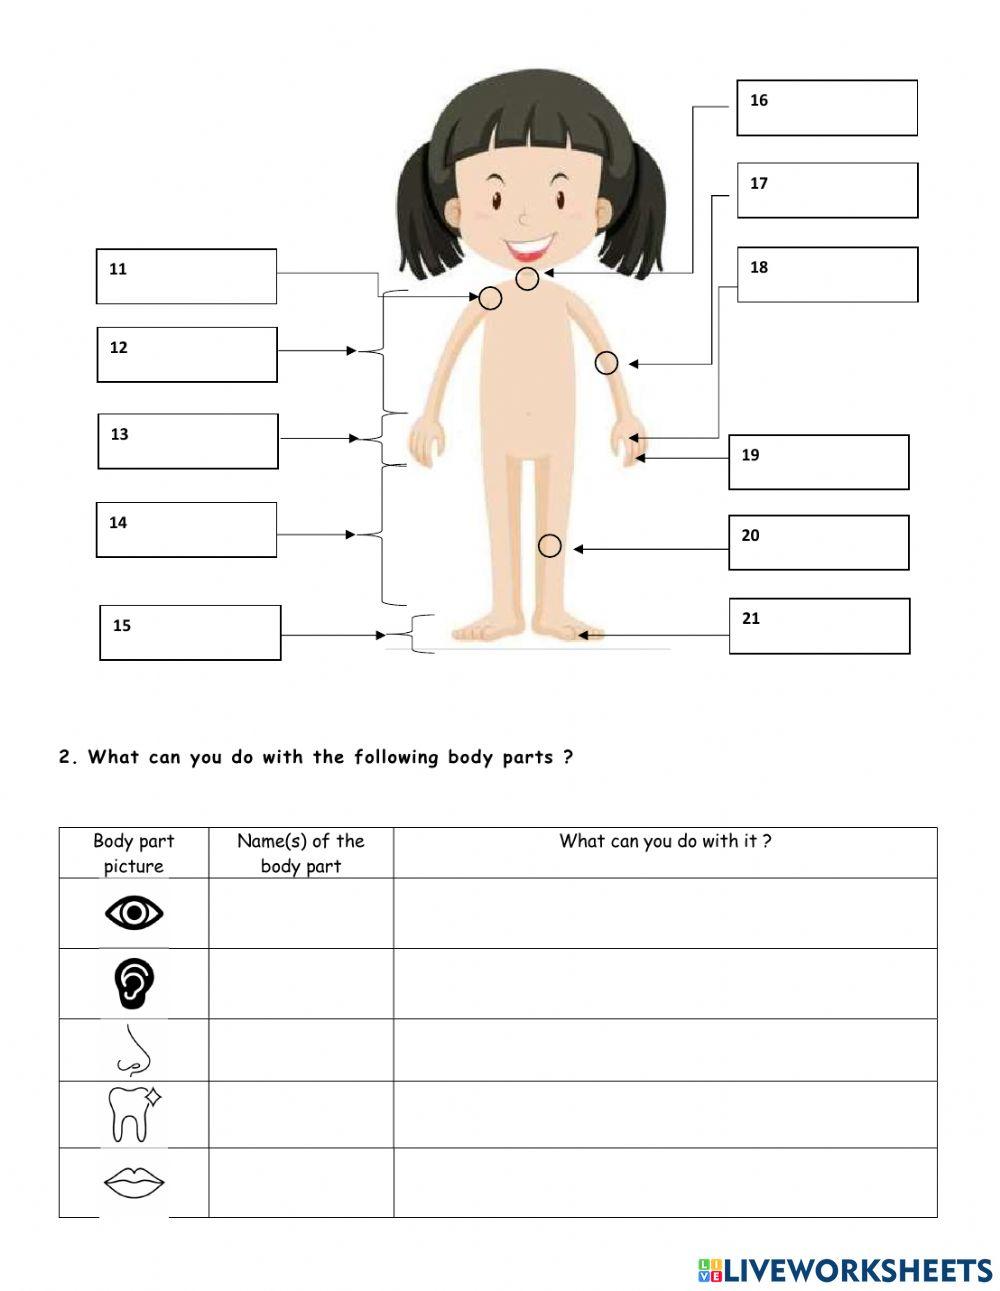 Body parts and what can you do with them worksheet | Live Worksheets